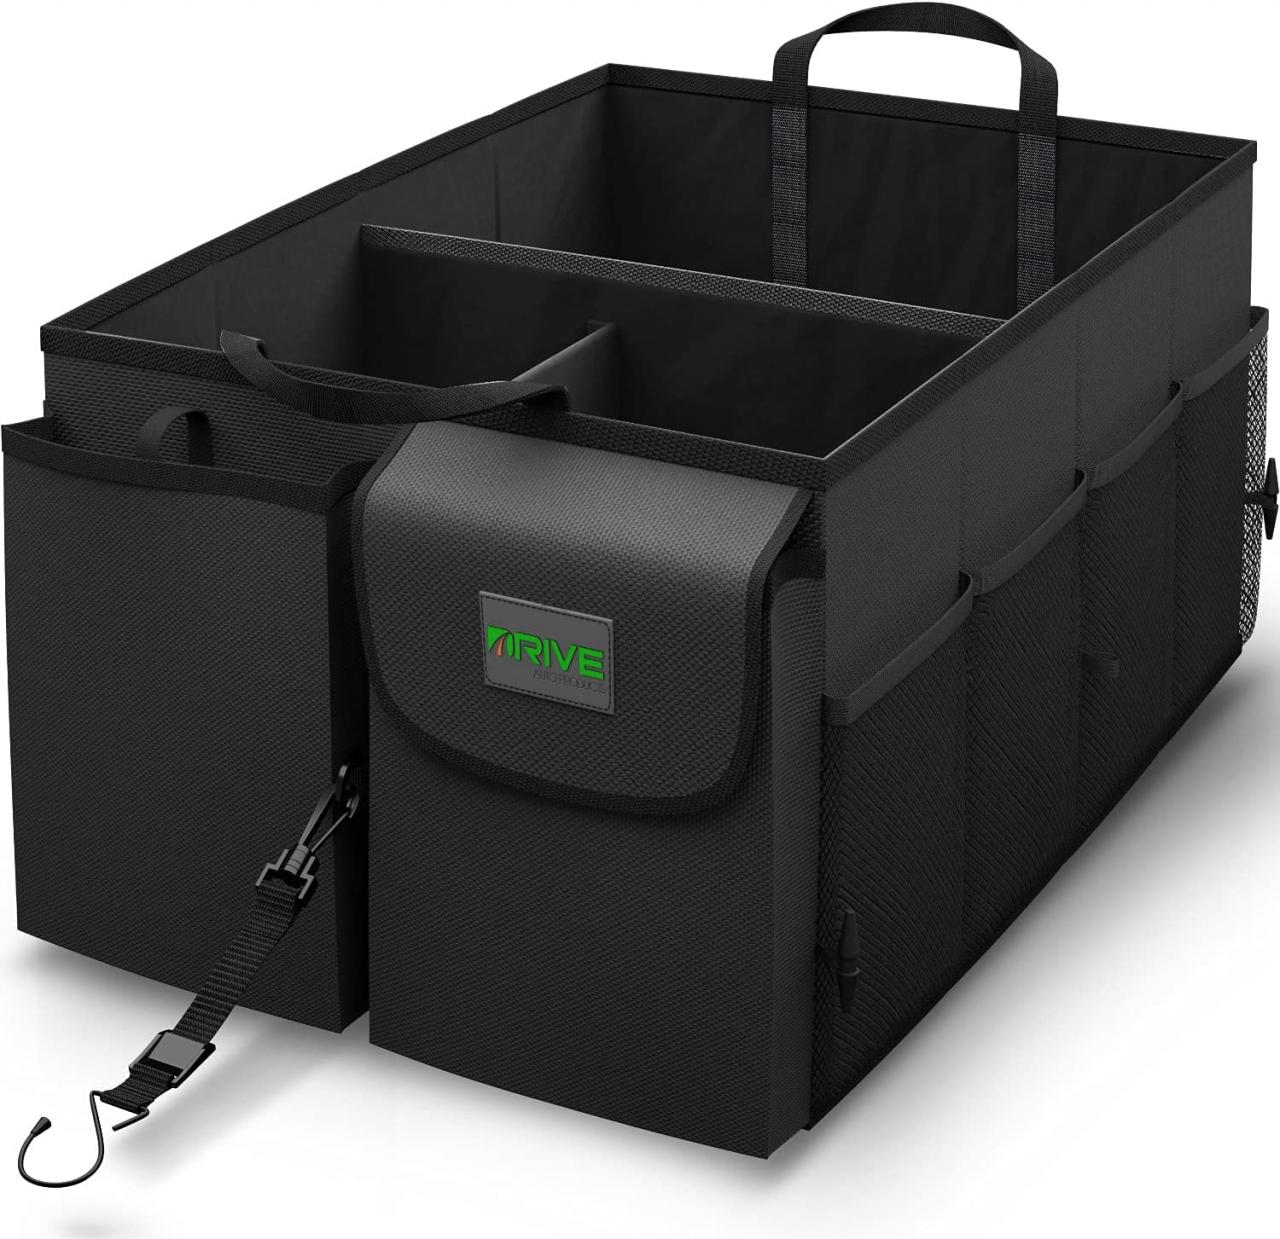 A Detailed Review of the Drive Car Trunk Storage Organizer